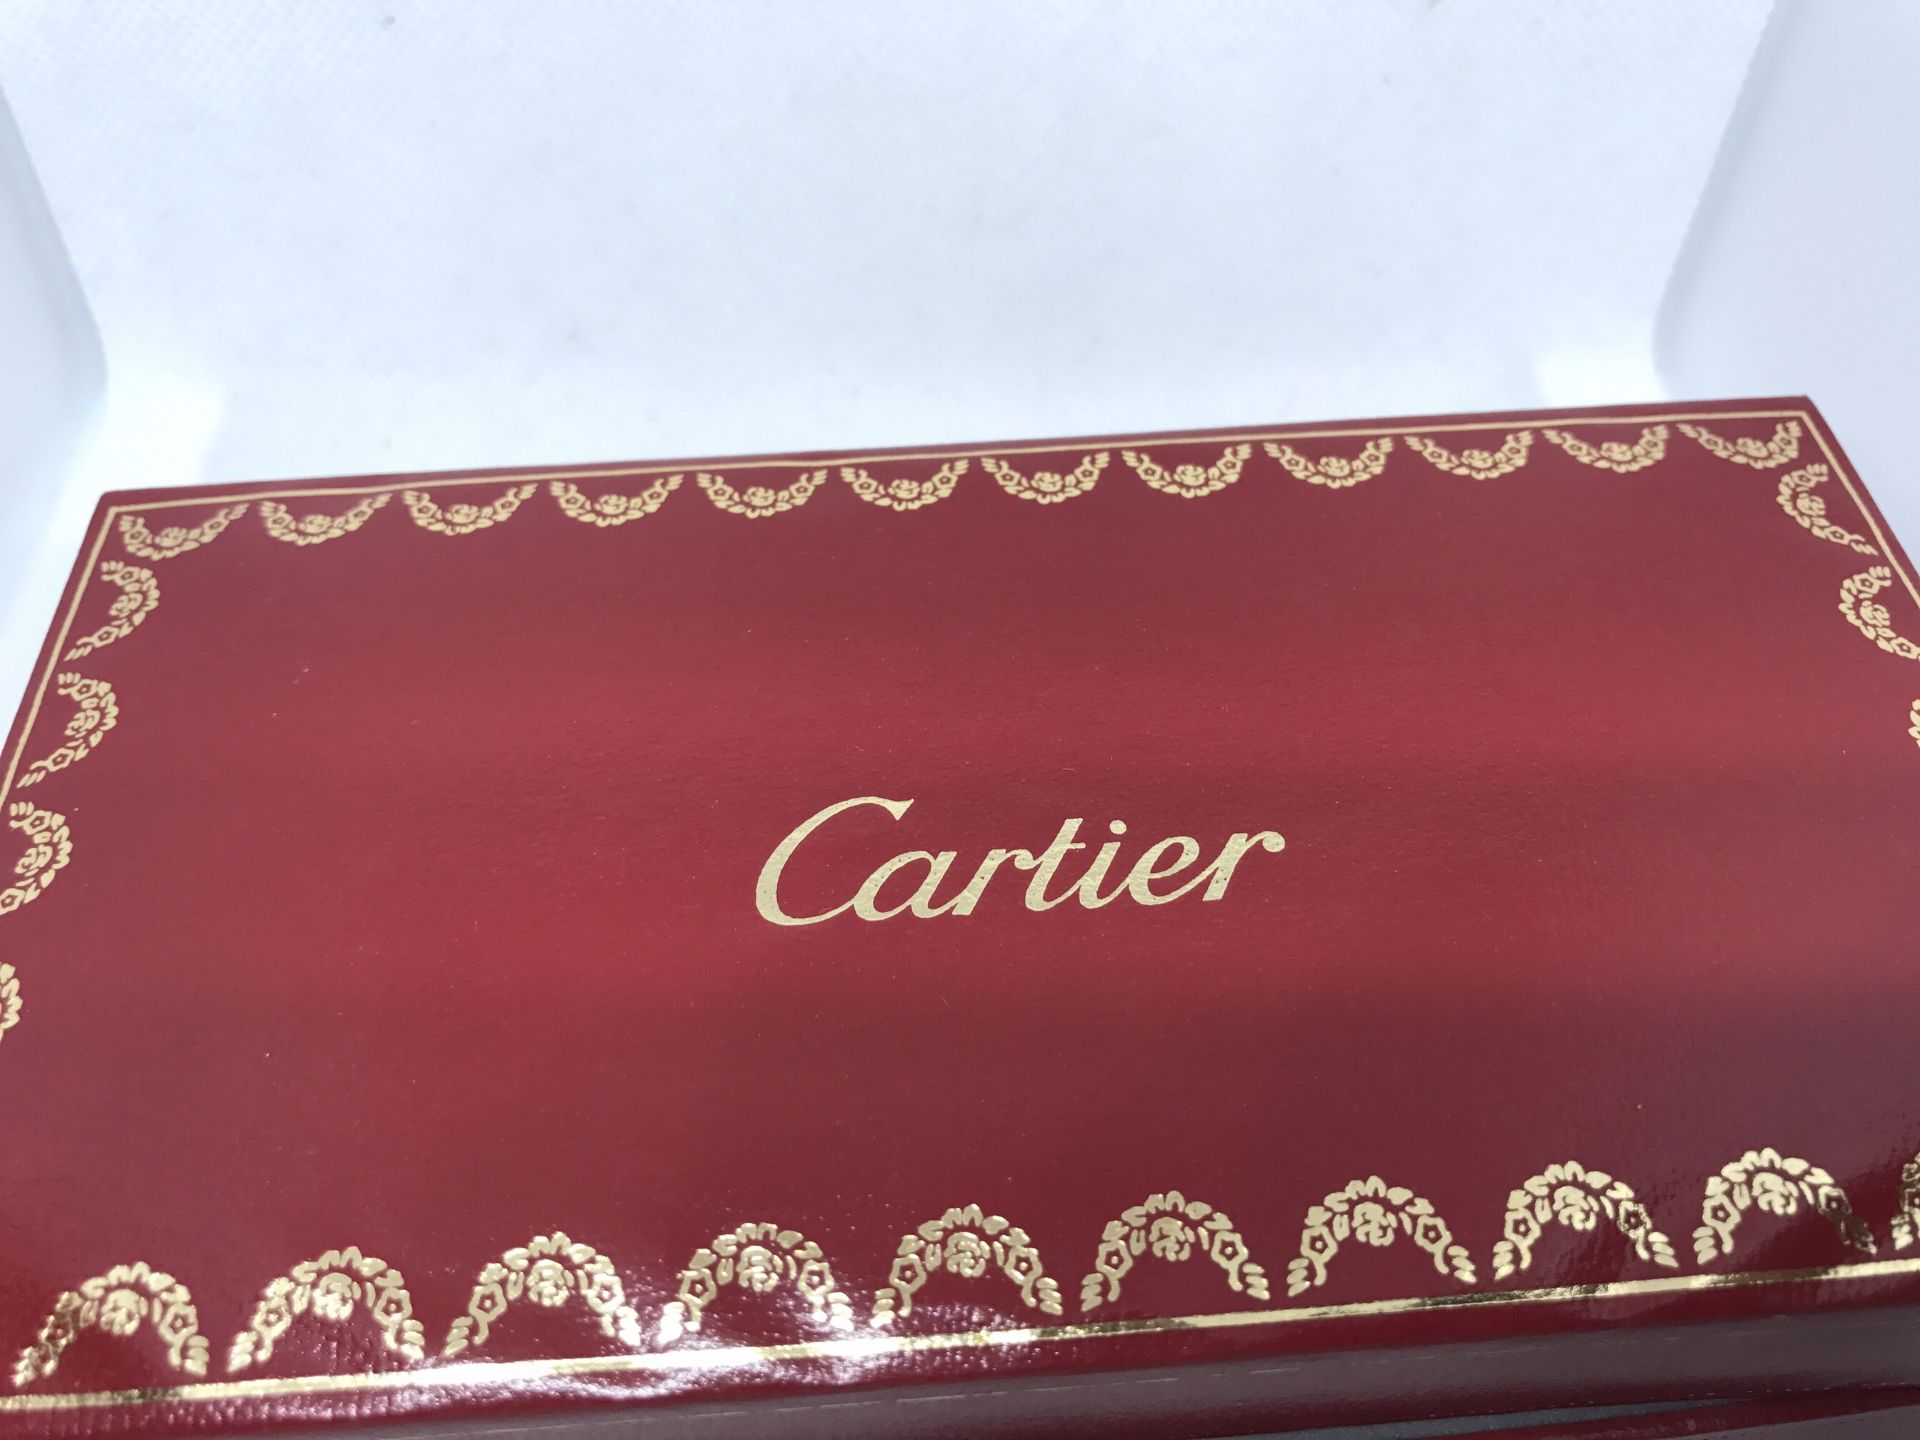 CARTIER SUNGLASSES WITH BOX & CASE - Image 6 of 6